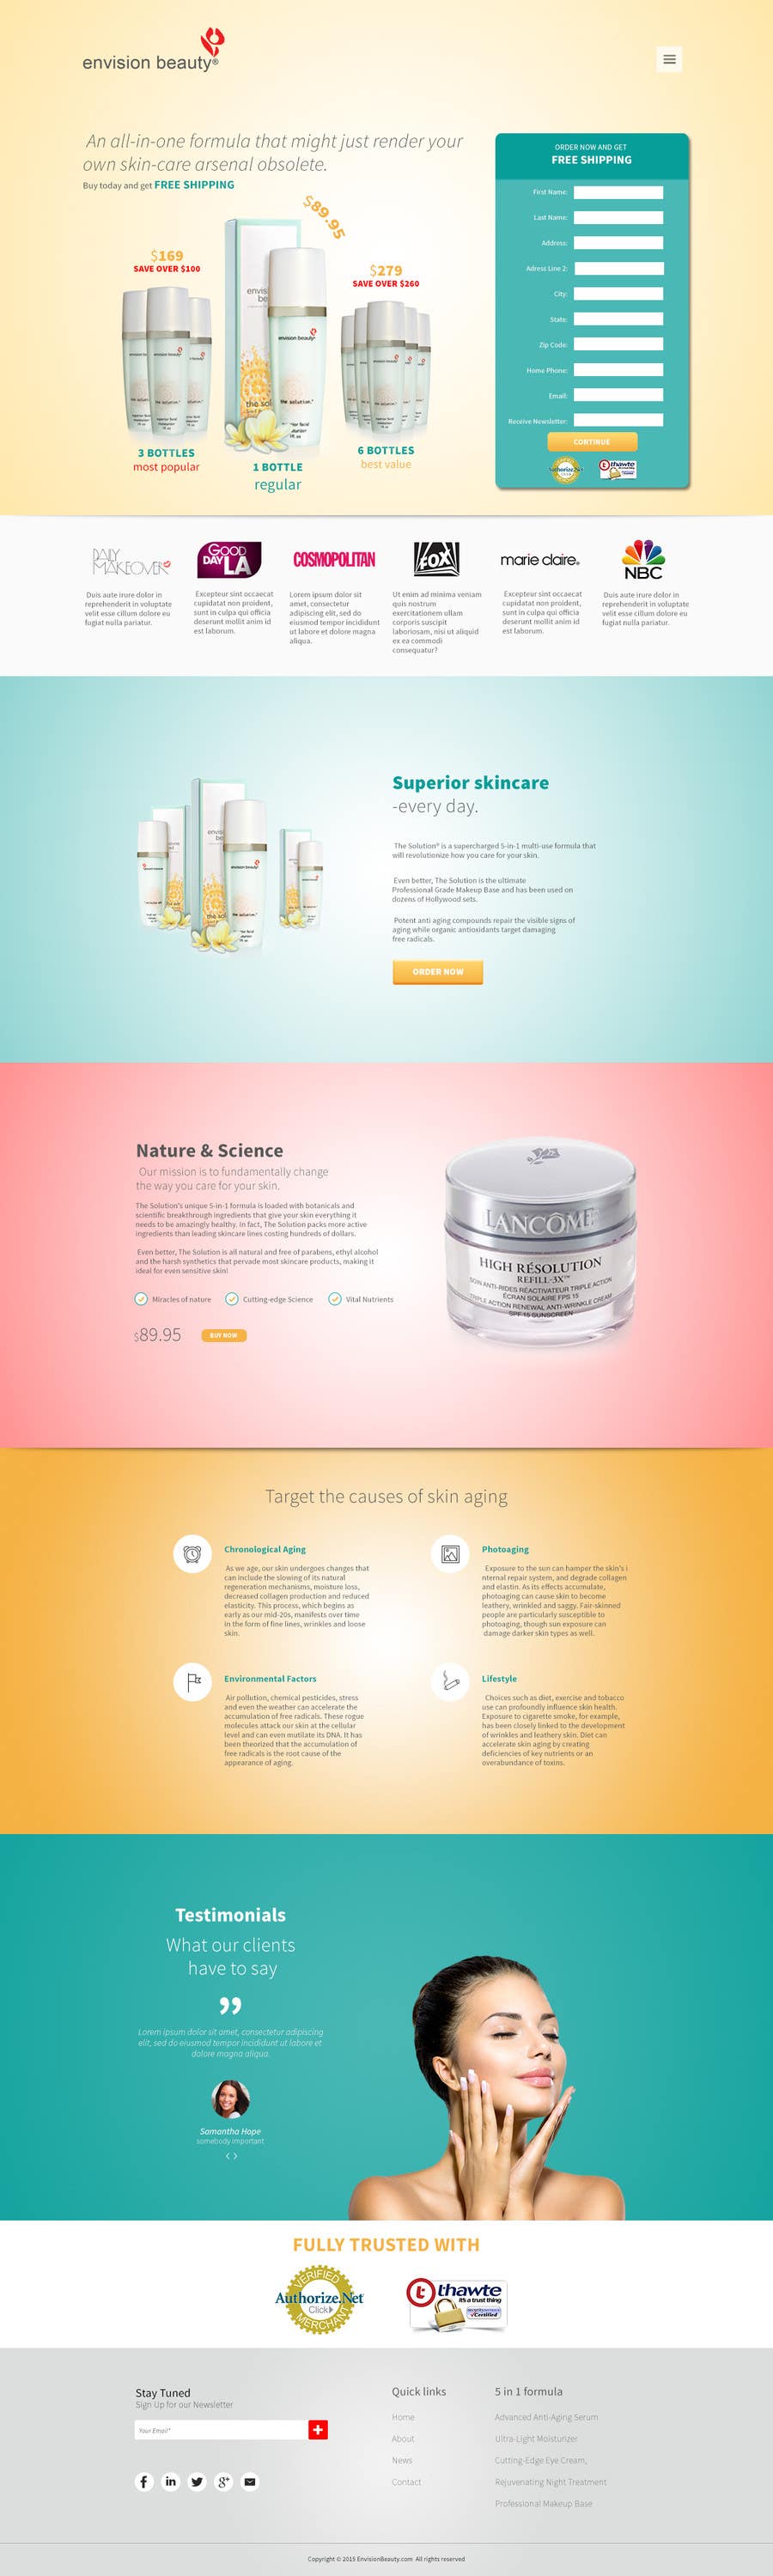 Konkurrenceindlæg #3 for                                                 Design a Skin Care Landing page for PPC campaign to collect leads
                                            